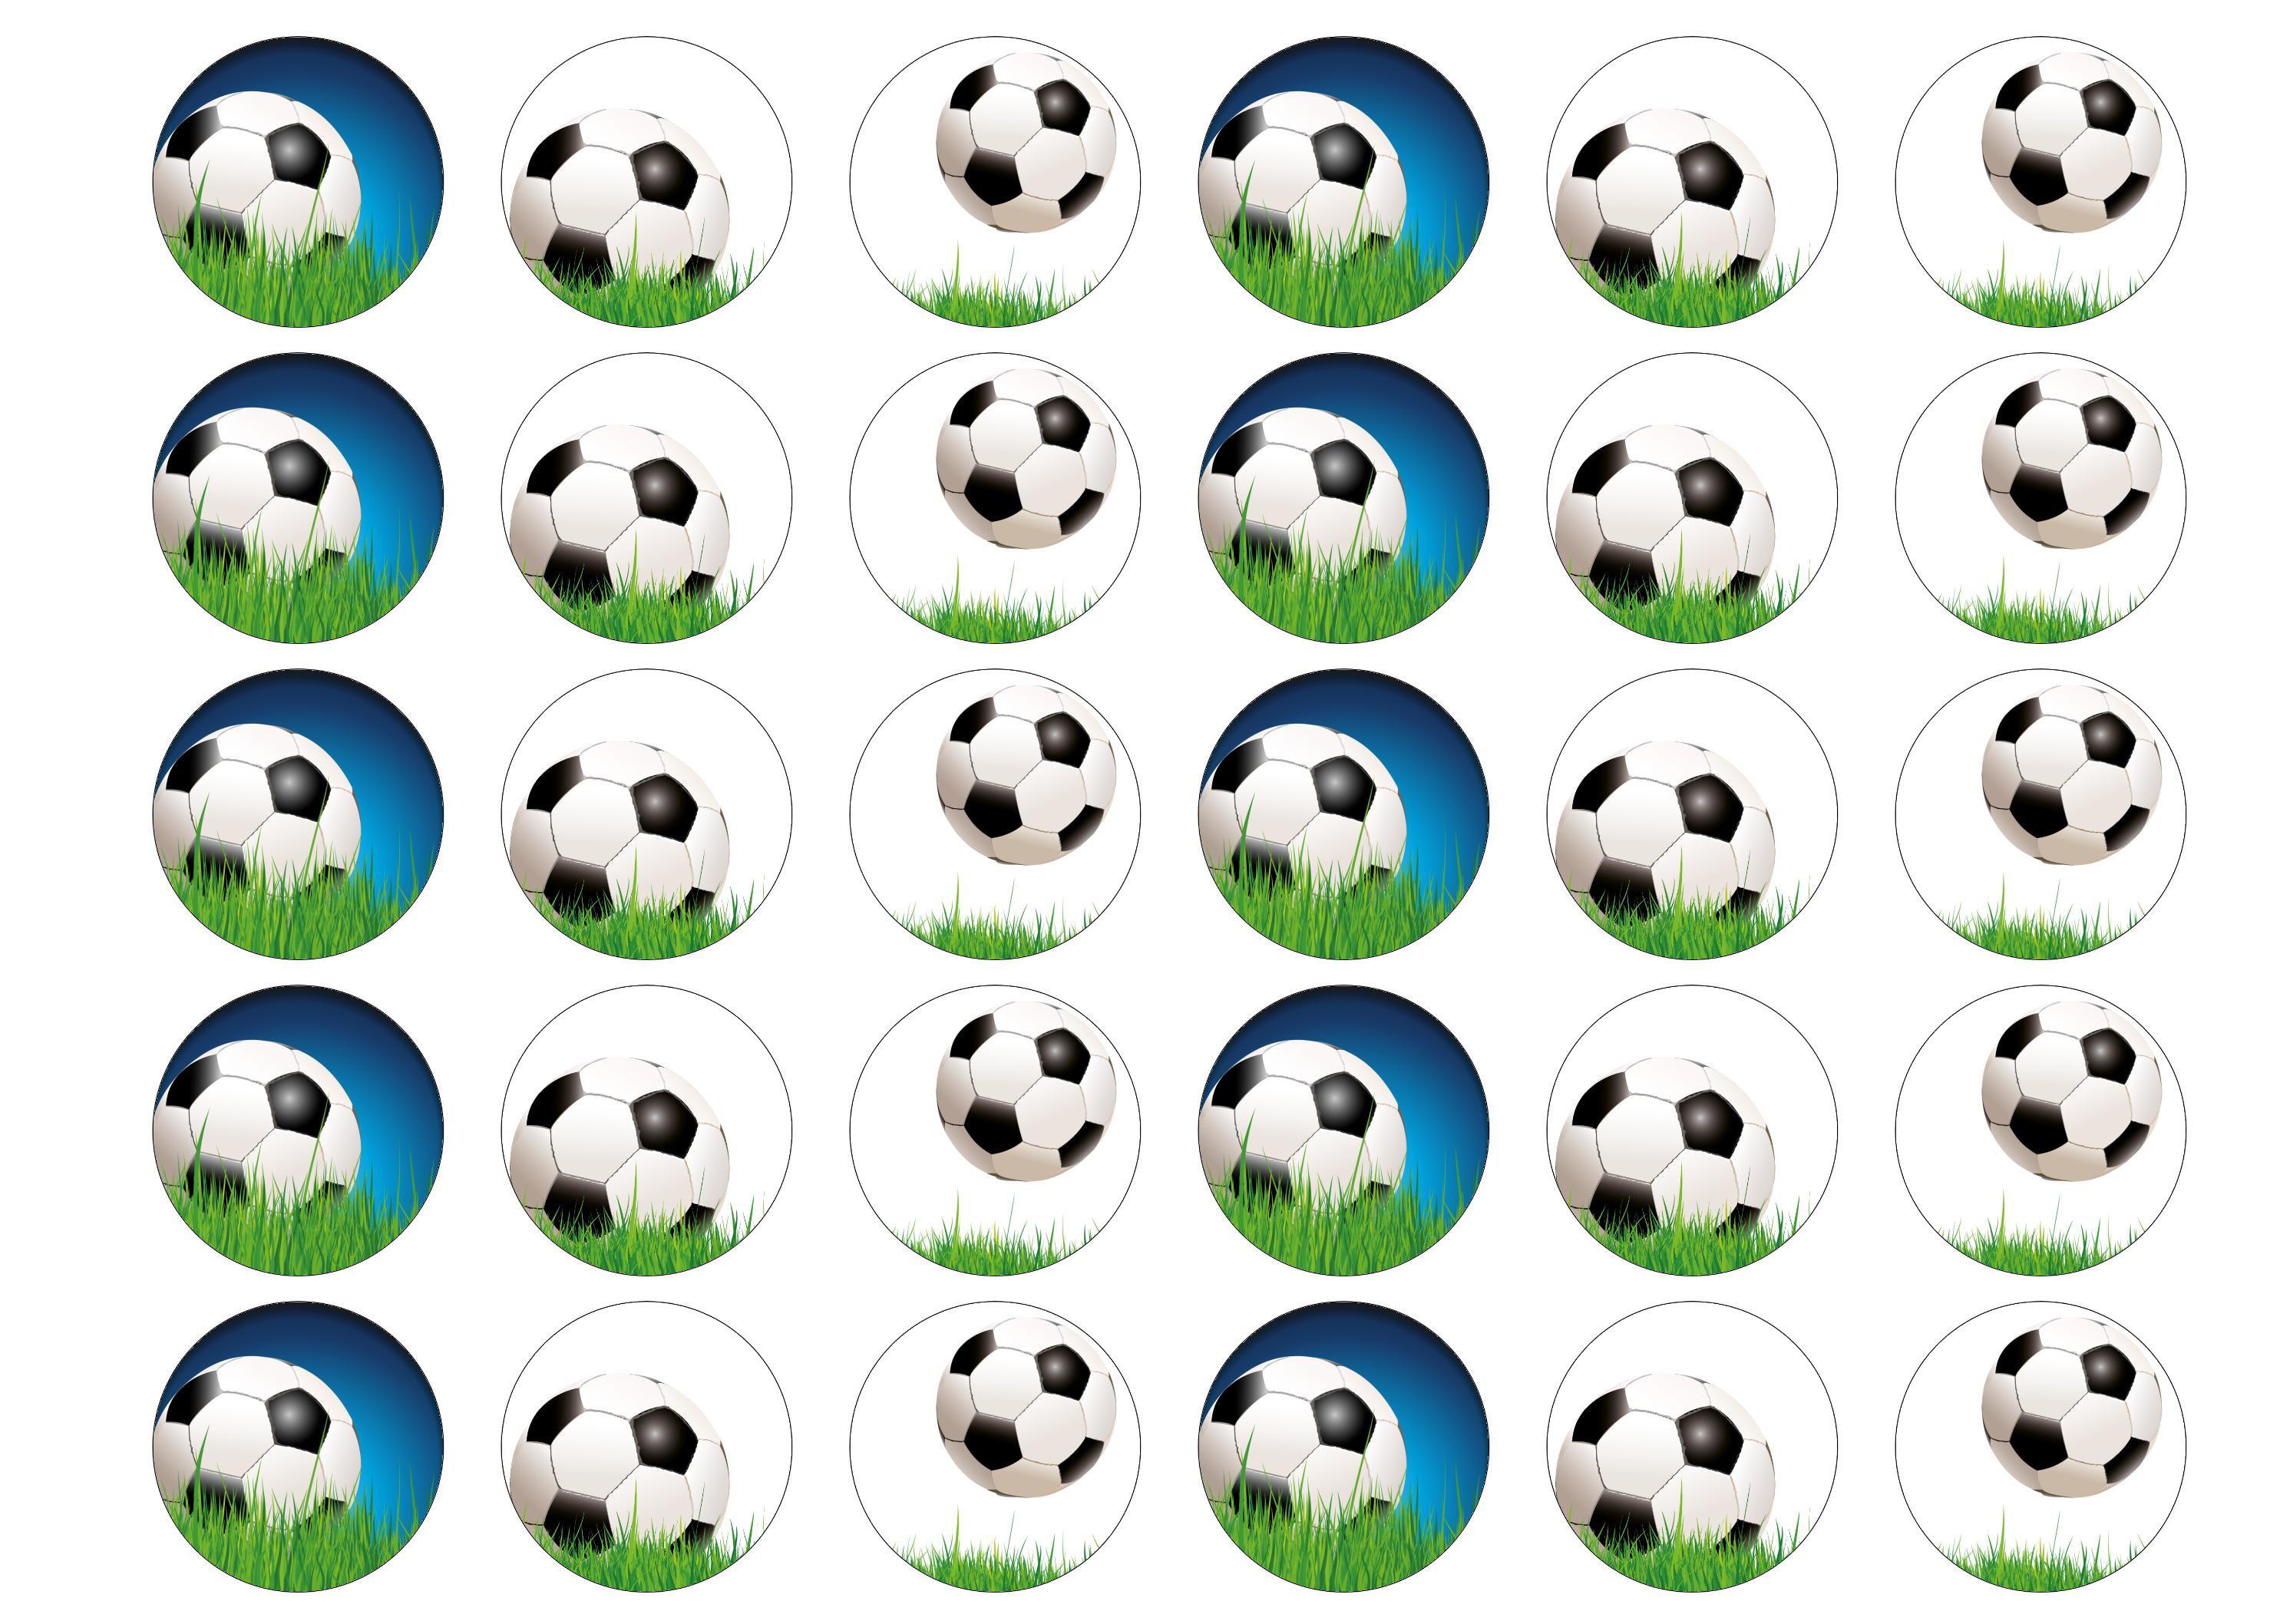 30 edible cupcake toppers with images of soccer balls